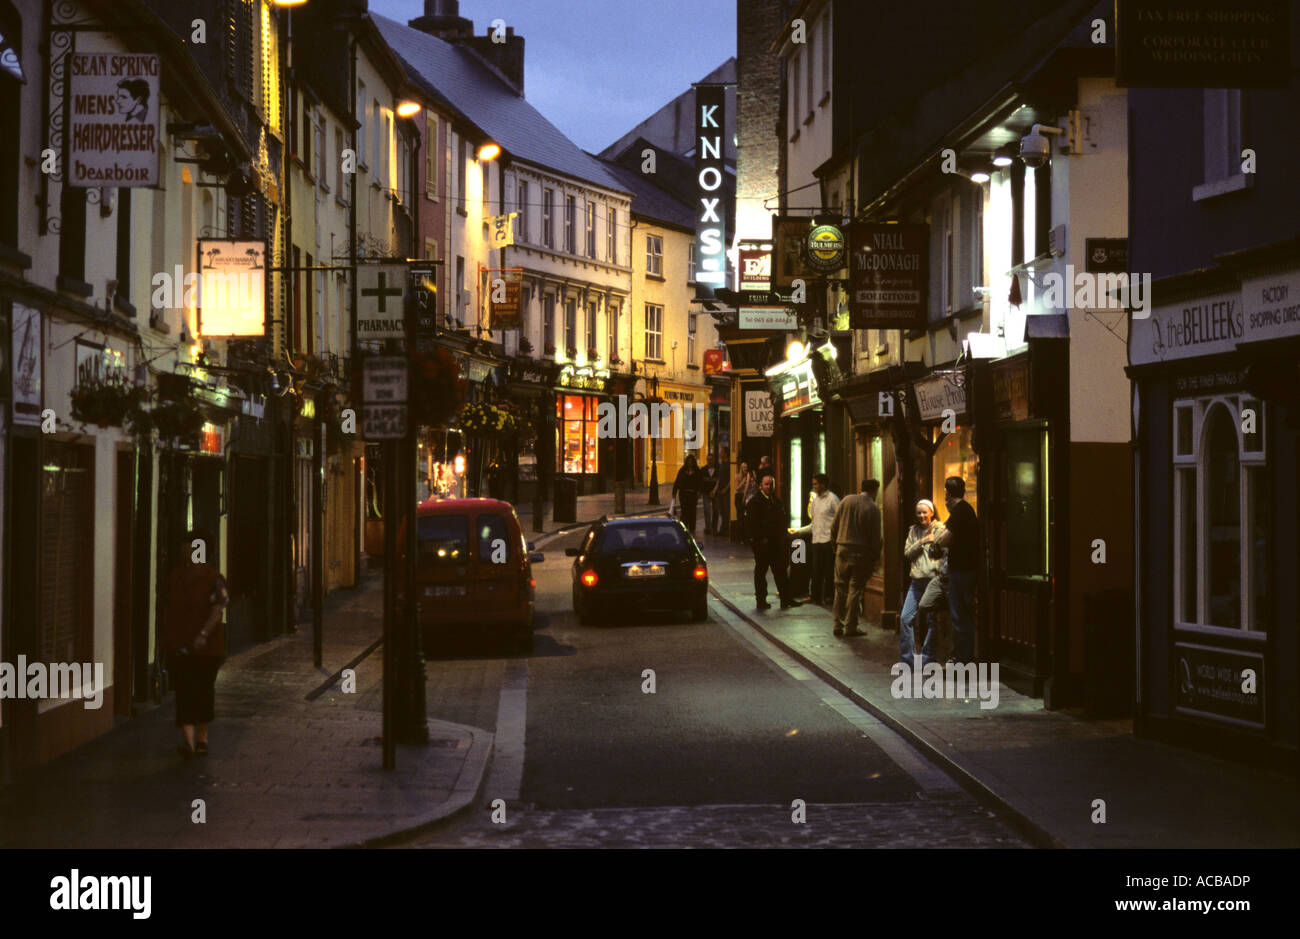 Evening scene in the centre of the town of Ennis, Co Clare, Republic of Ireland. Stock Photo